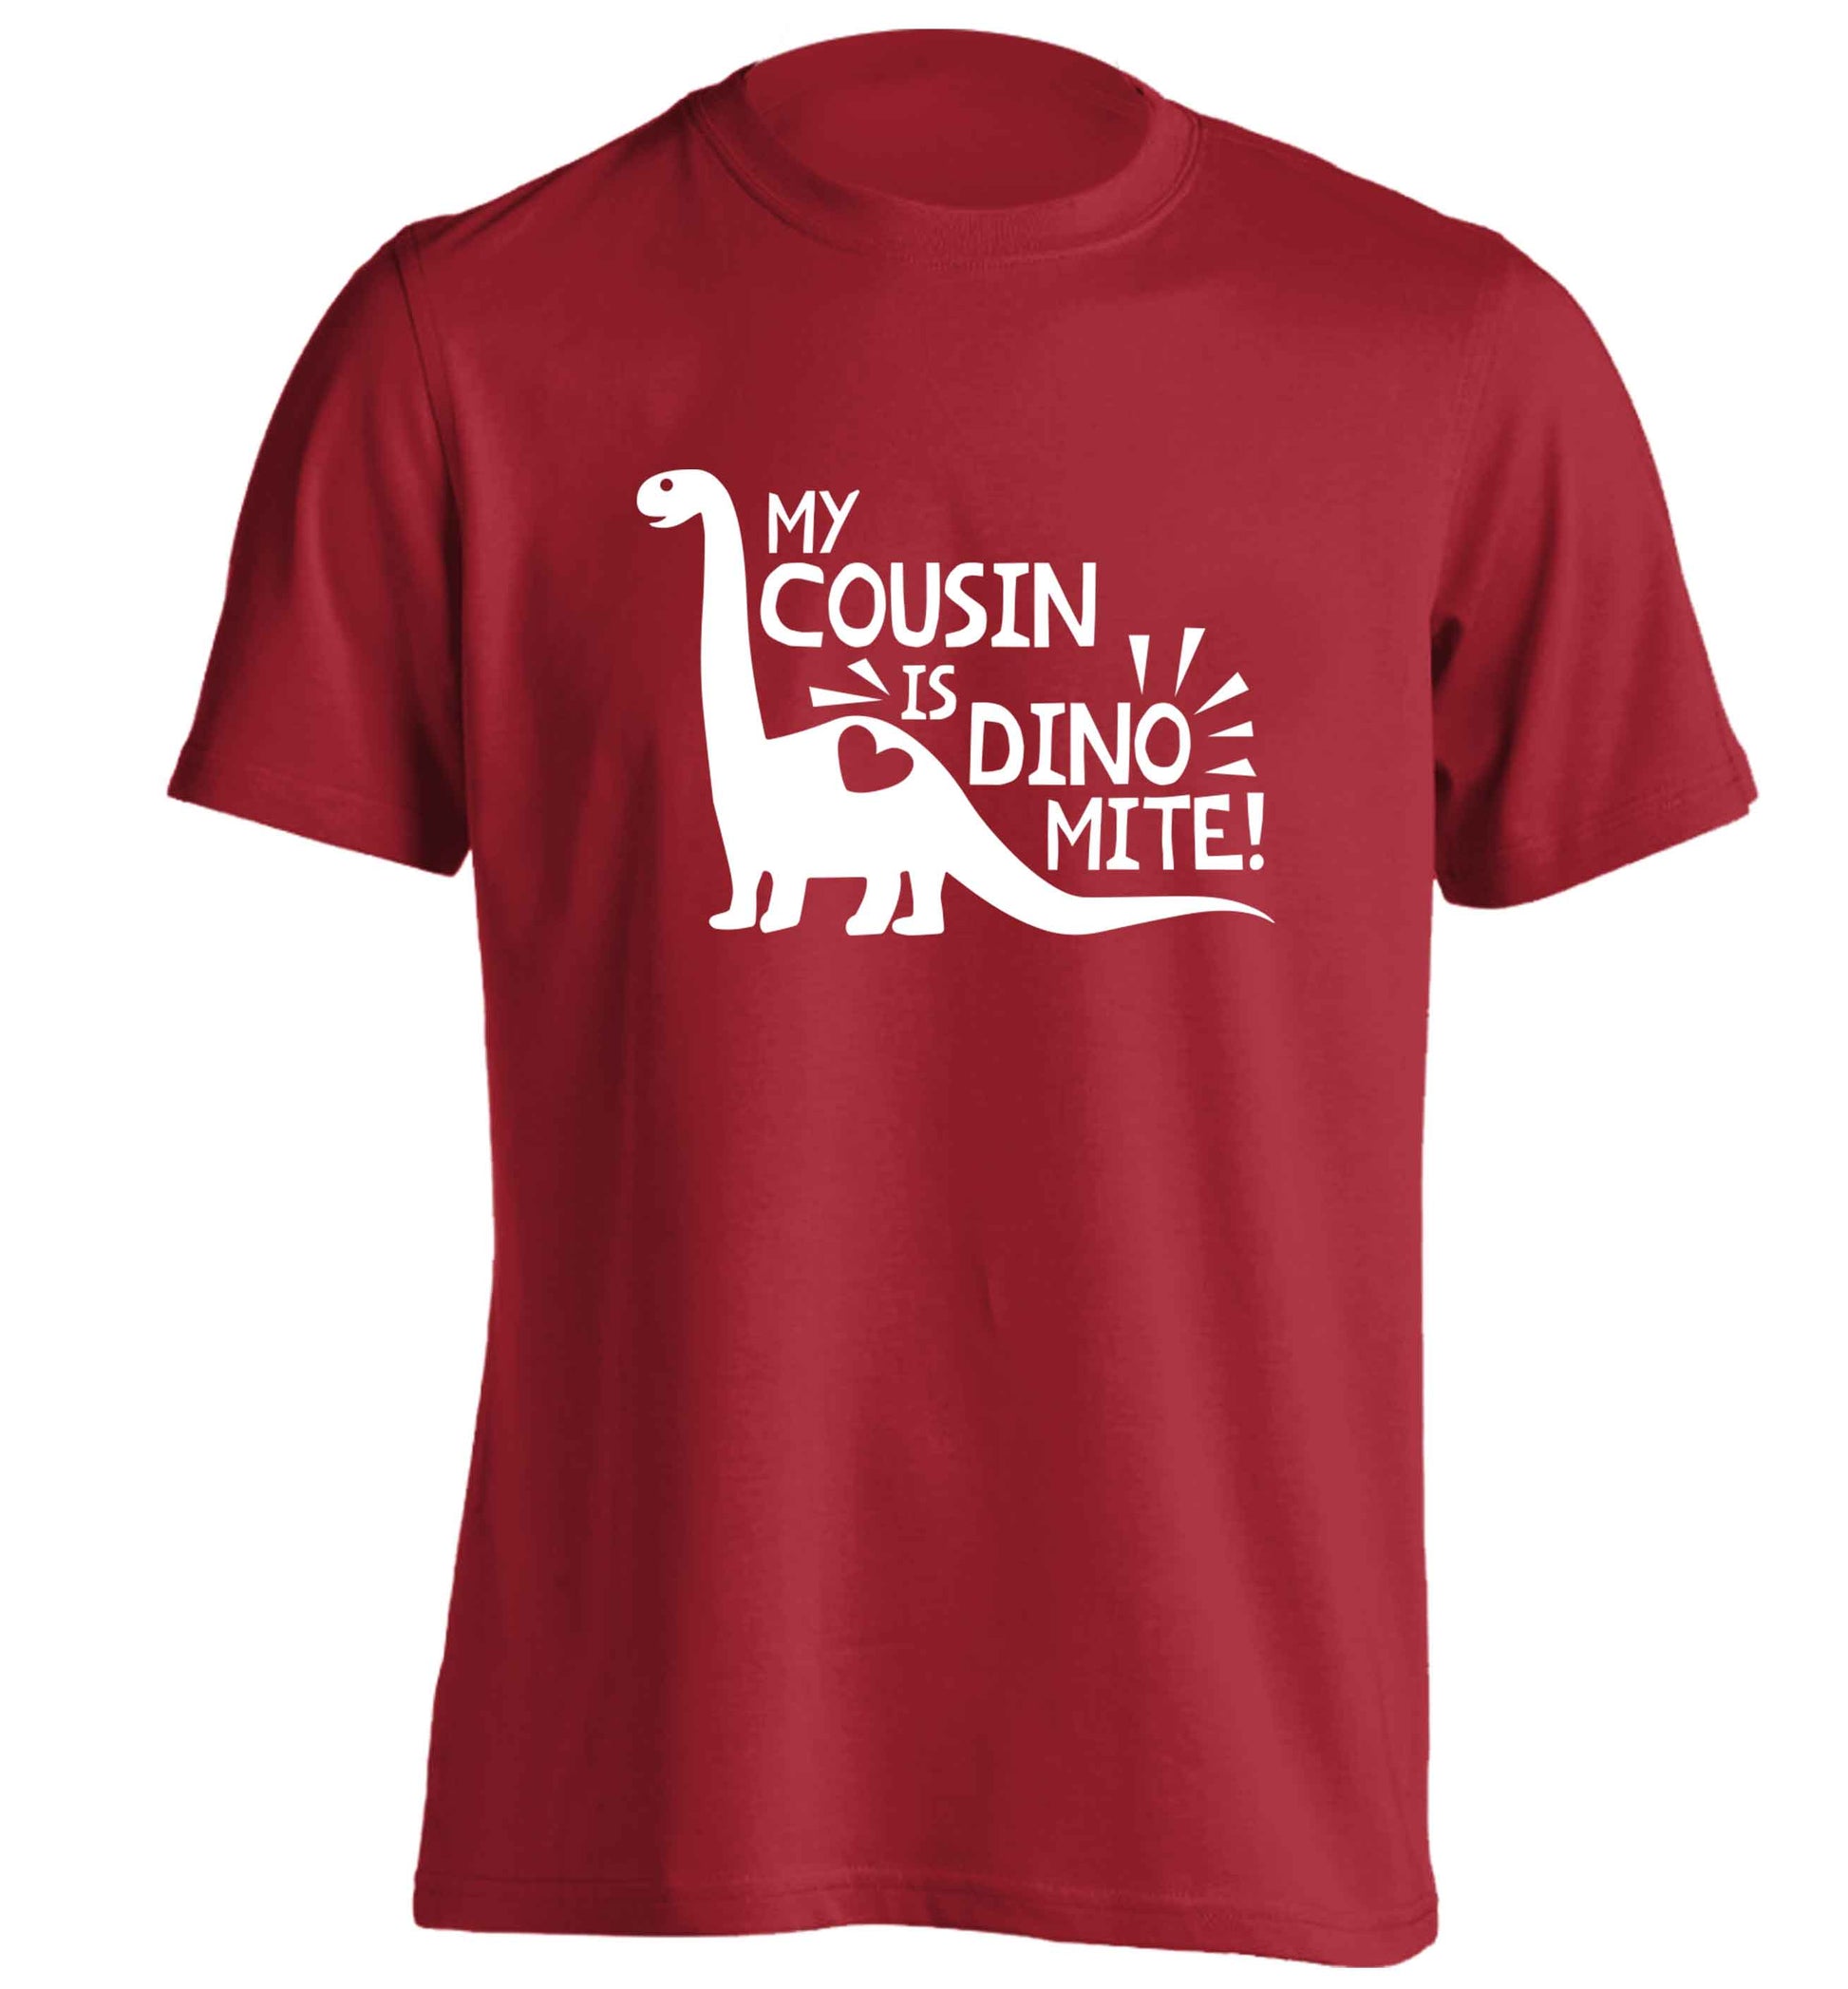 My cousin is dinomite! adults unisex red Tshirt 2XL